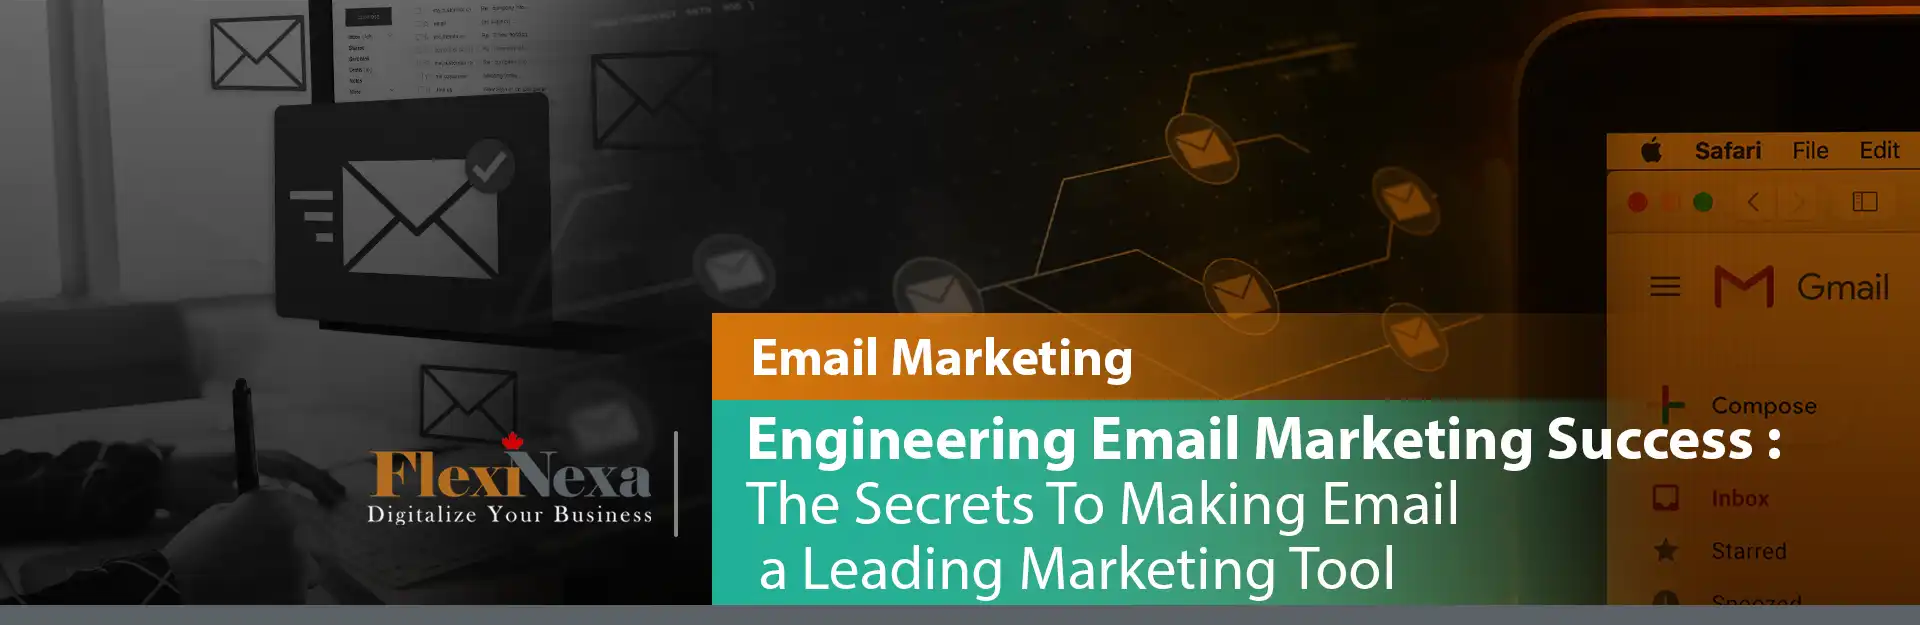 Engineering Email Marketing Success: The Secrets To Making Email A Leading Marketing Tool